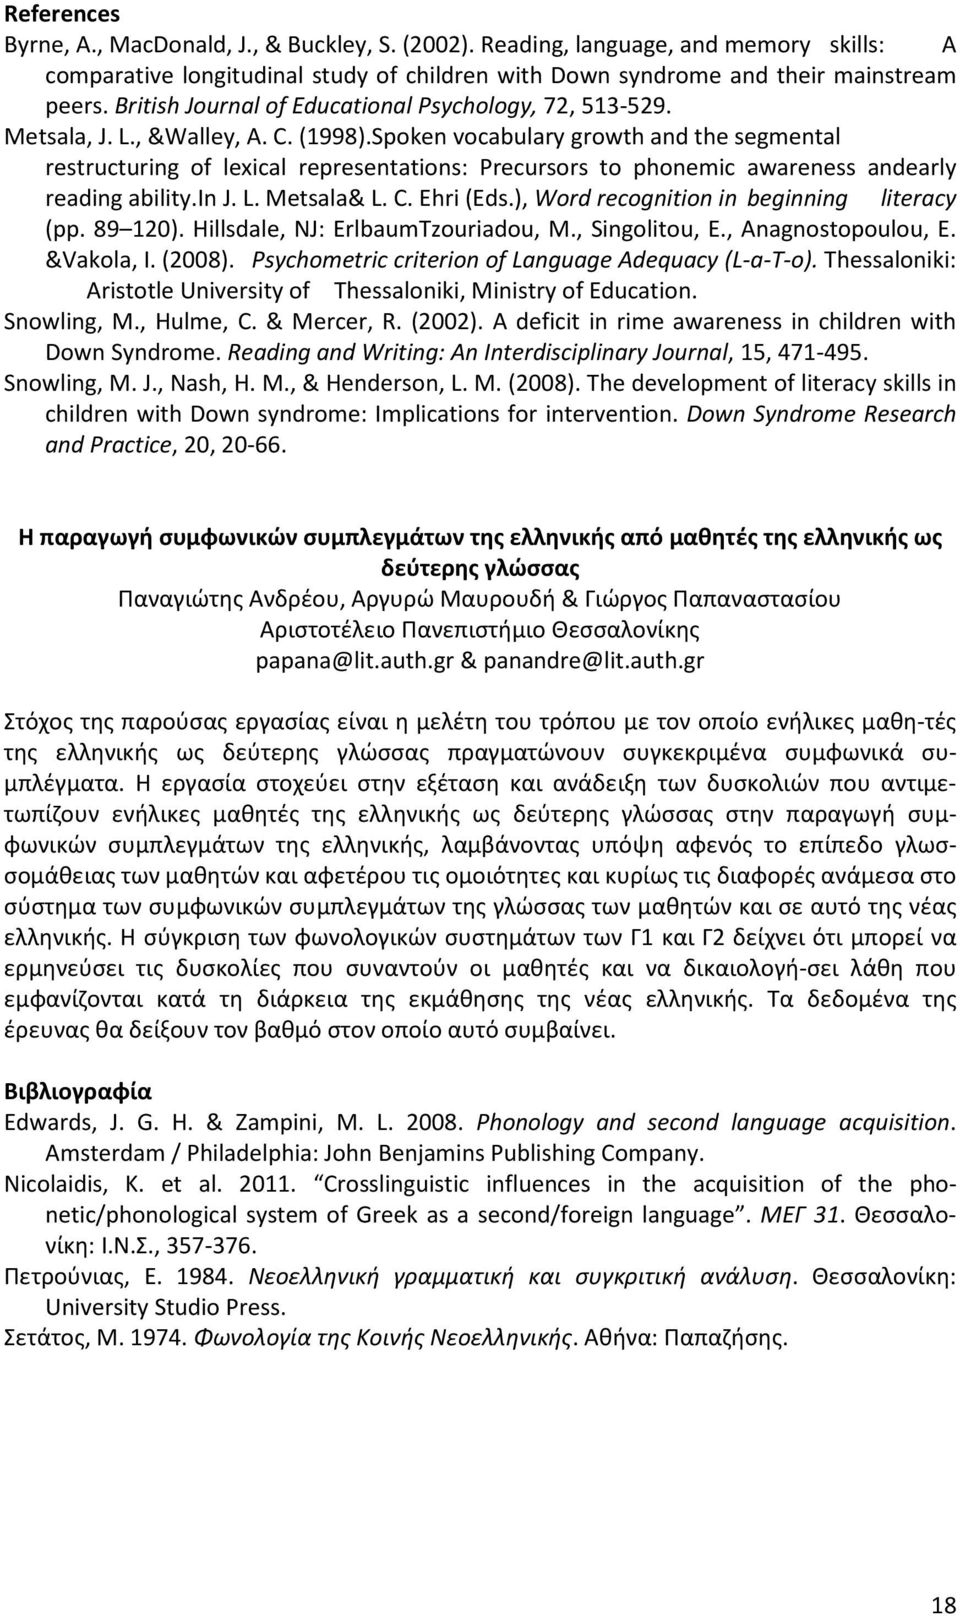 Spoken vocabulary growth and the segmental restructuring of lexical representations: Precursors to phonemic awareness andearly reading ability.in J. L. Metsala& L. C. Ehri (Eds.